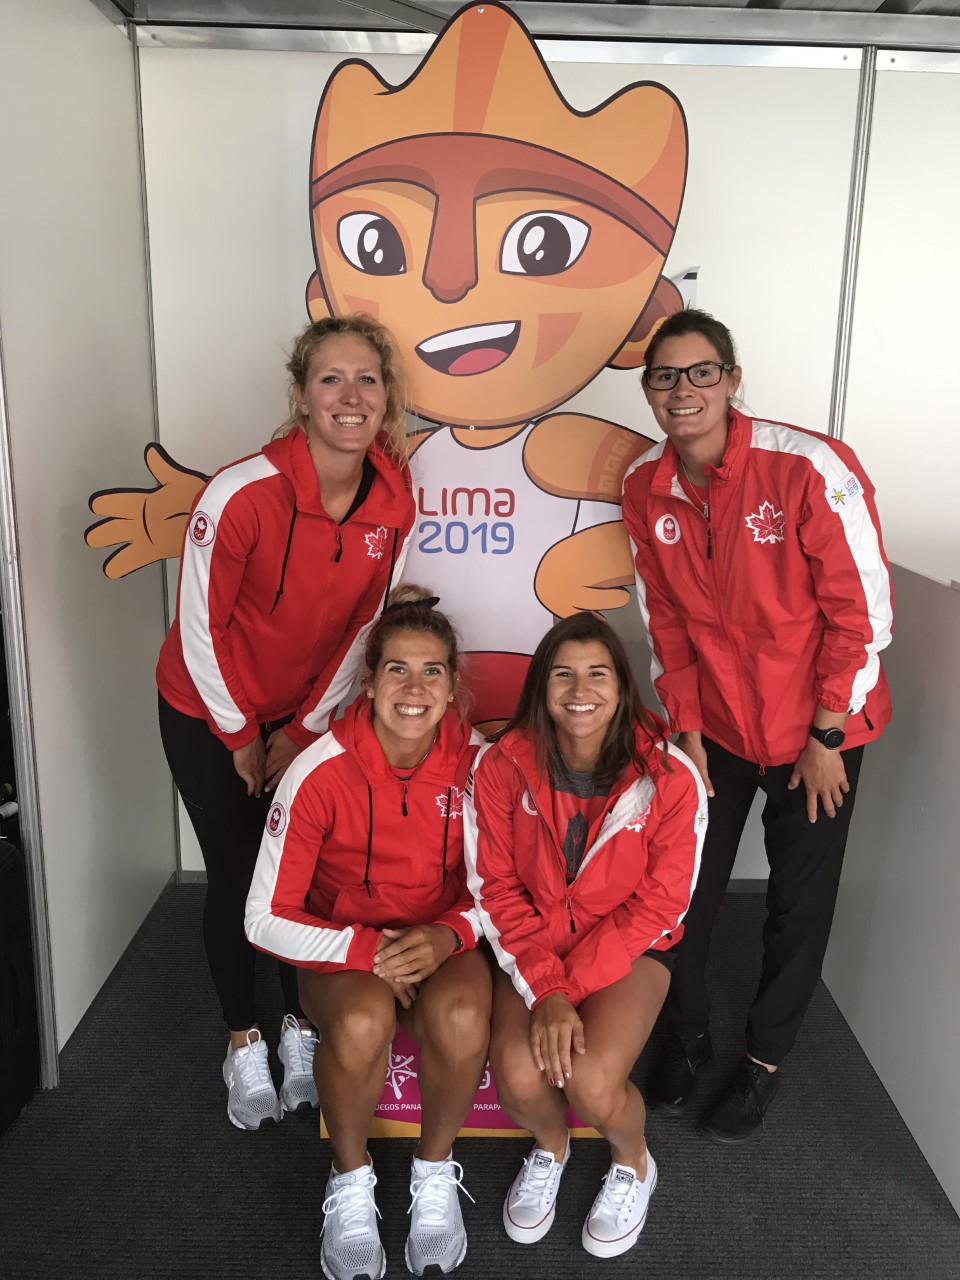 Four women in matching red and white team jackets pose in front of a cut-out of the Lima Pan Am Games 2019 mascot smiling.